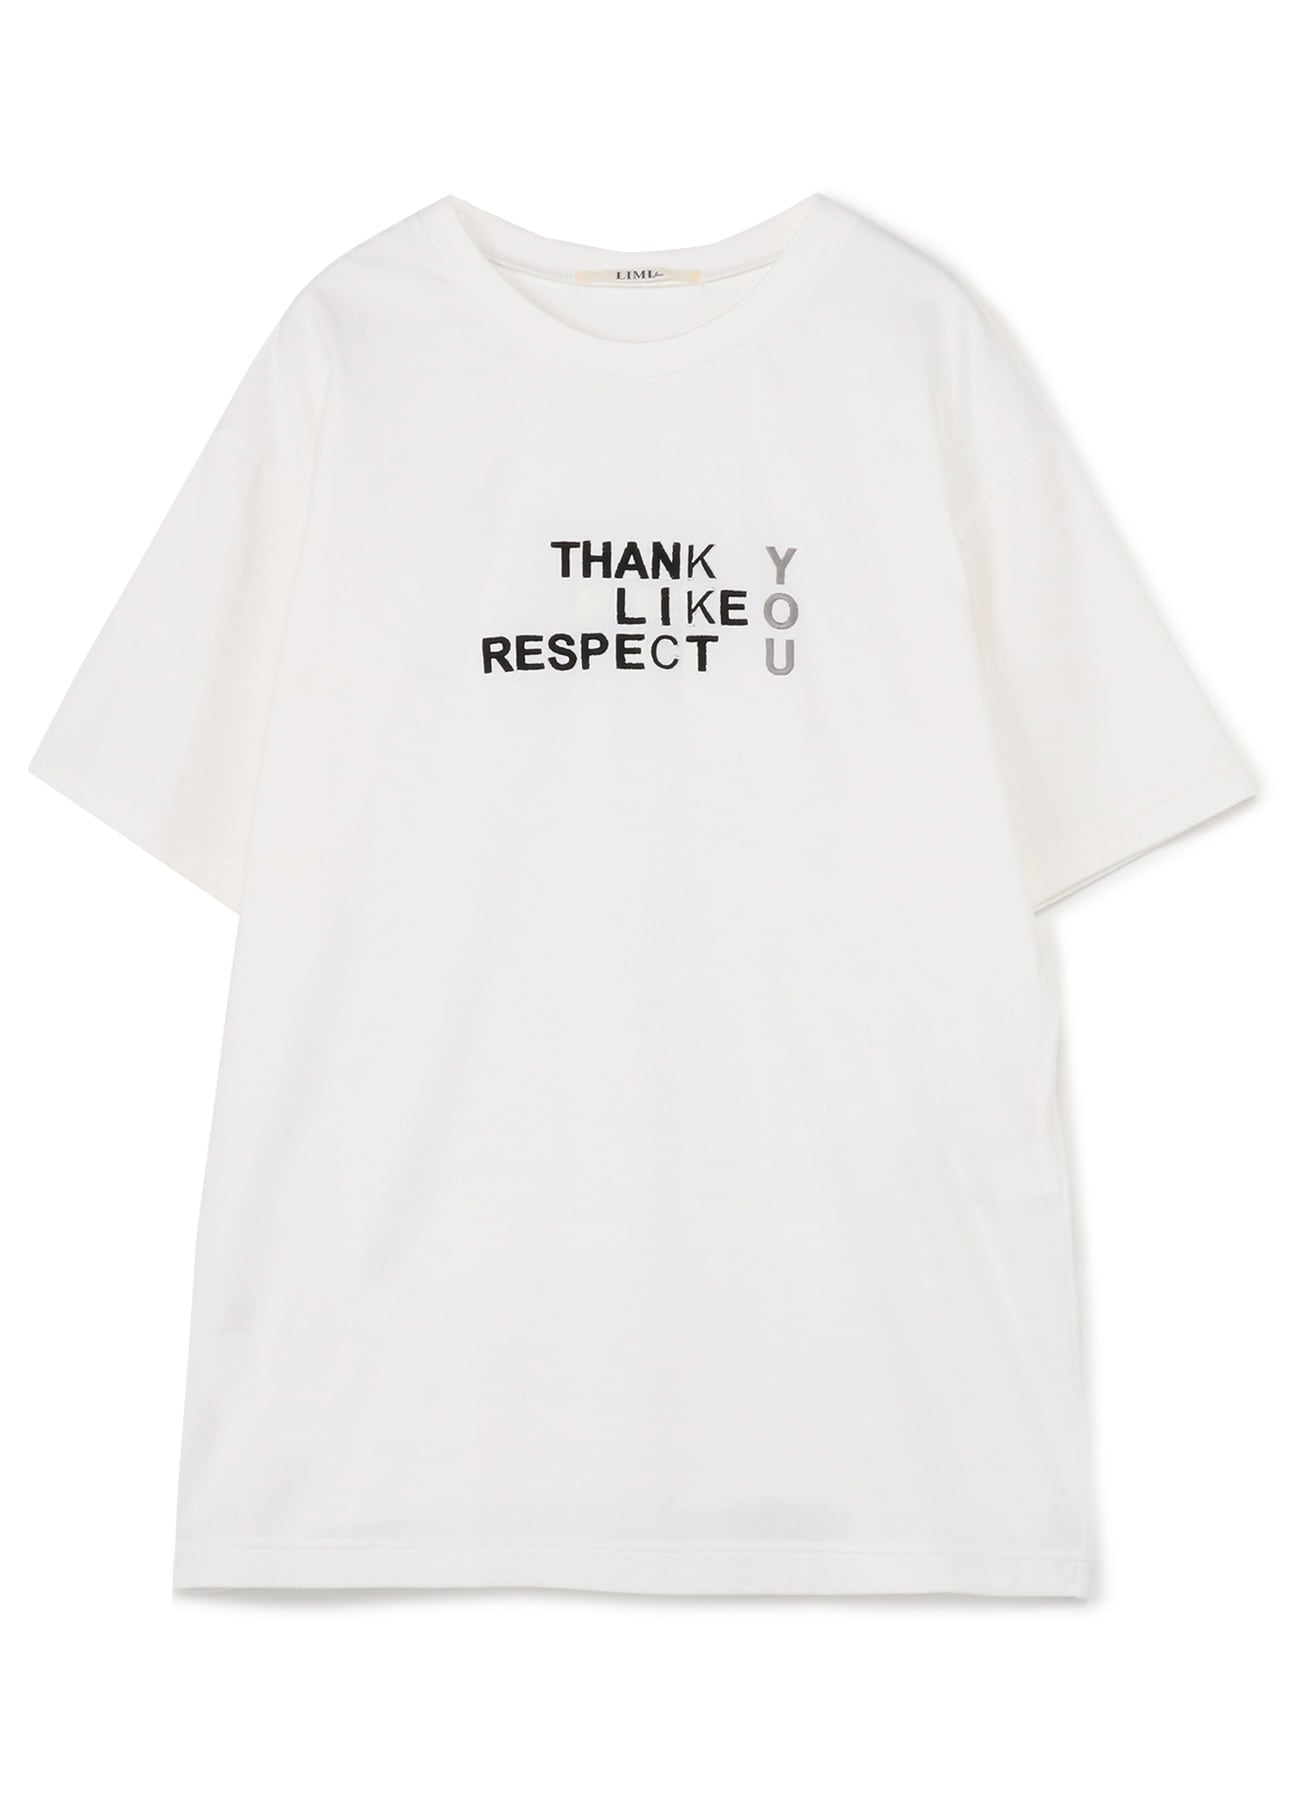 FU*K YOU Embroidery Oversized T-Shirt